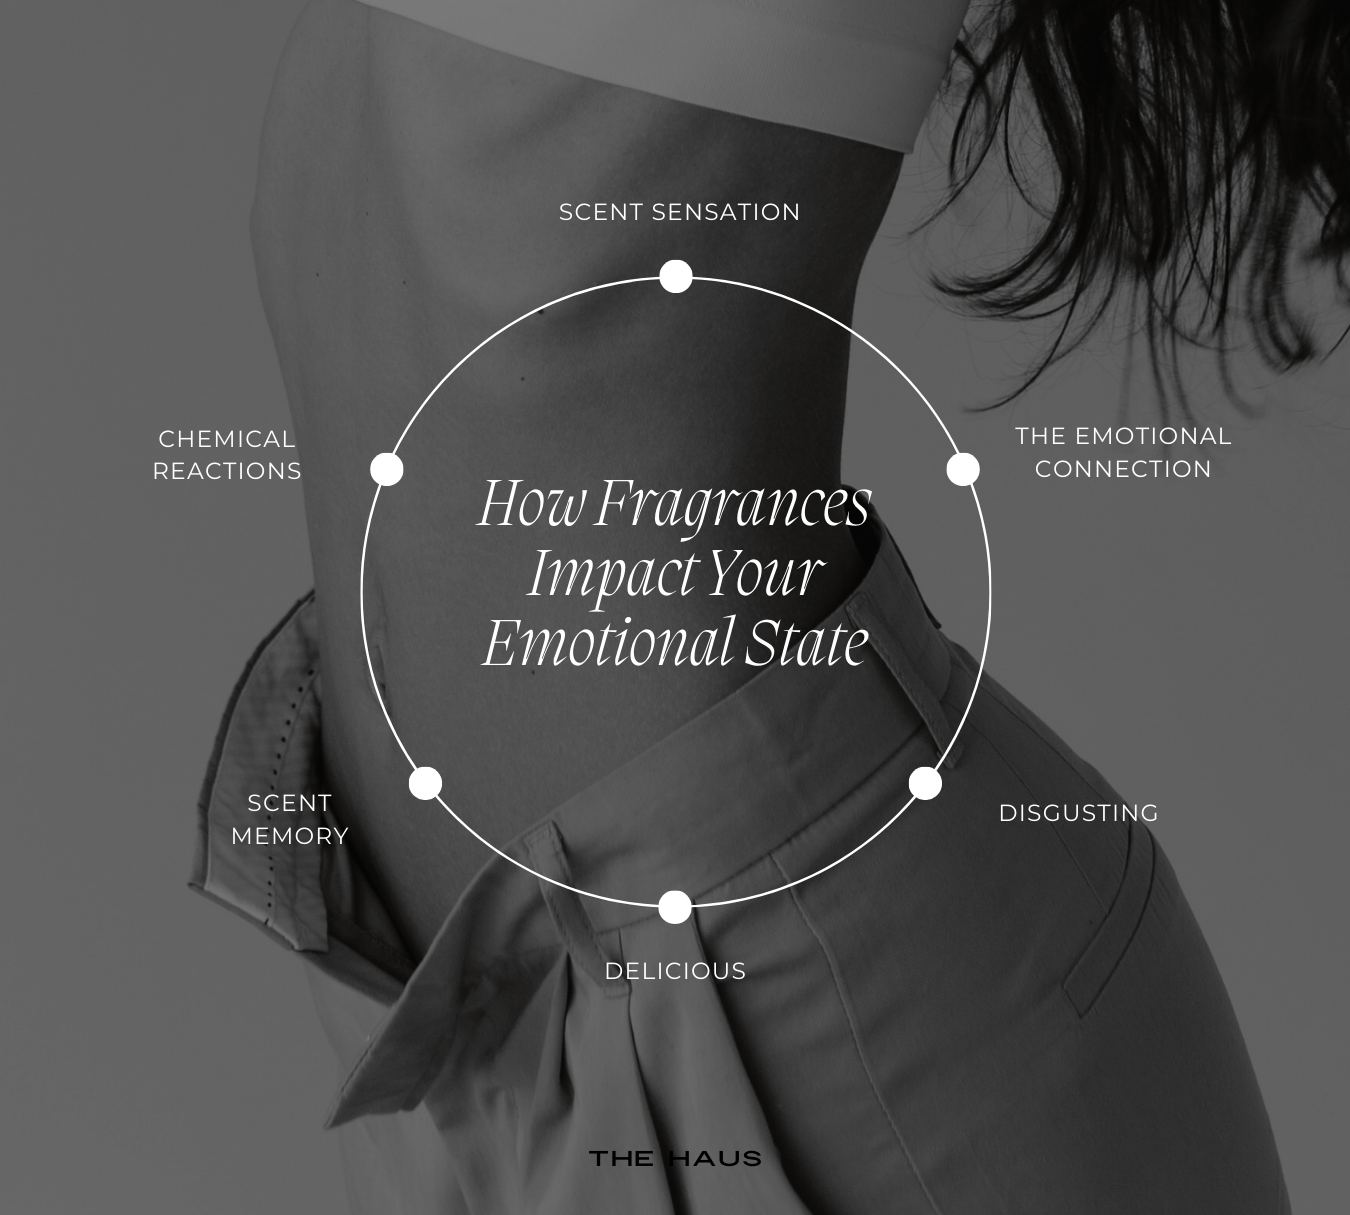 A black and white photo of a girl stretching in slacks with text about "How Fragrances Impact Your Emotional State"